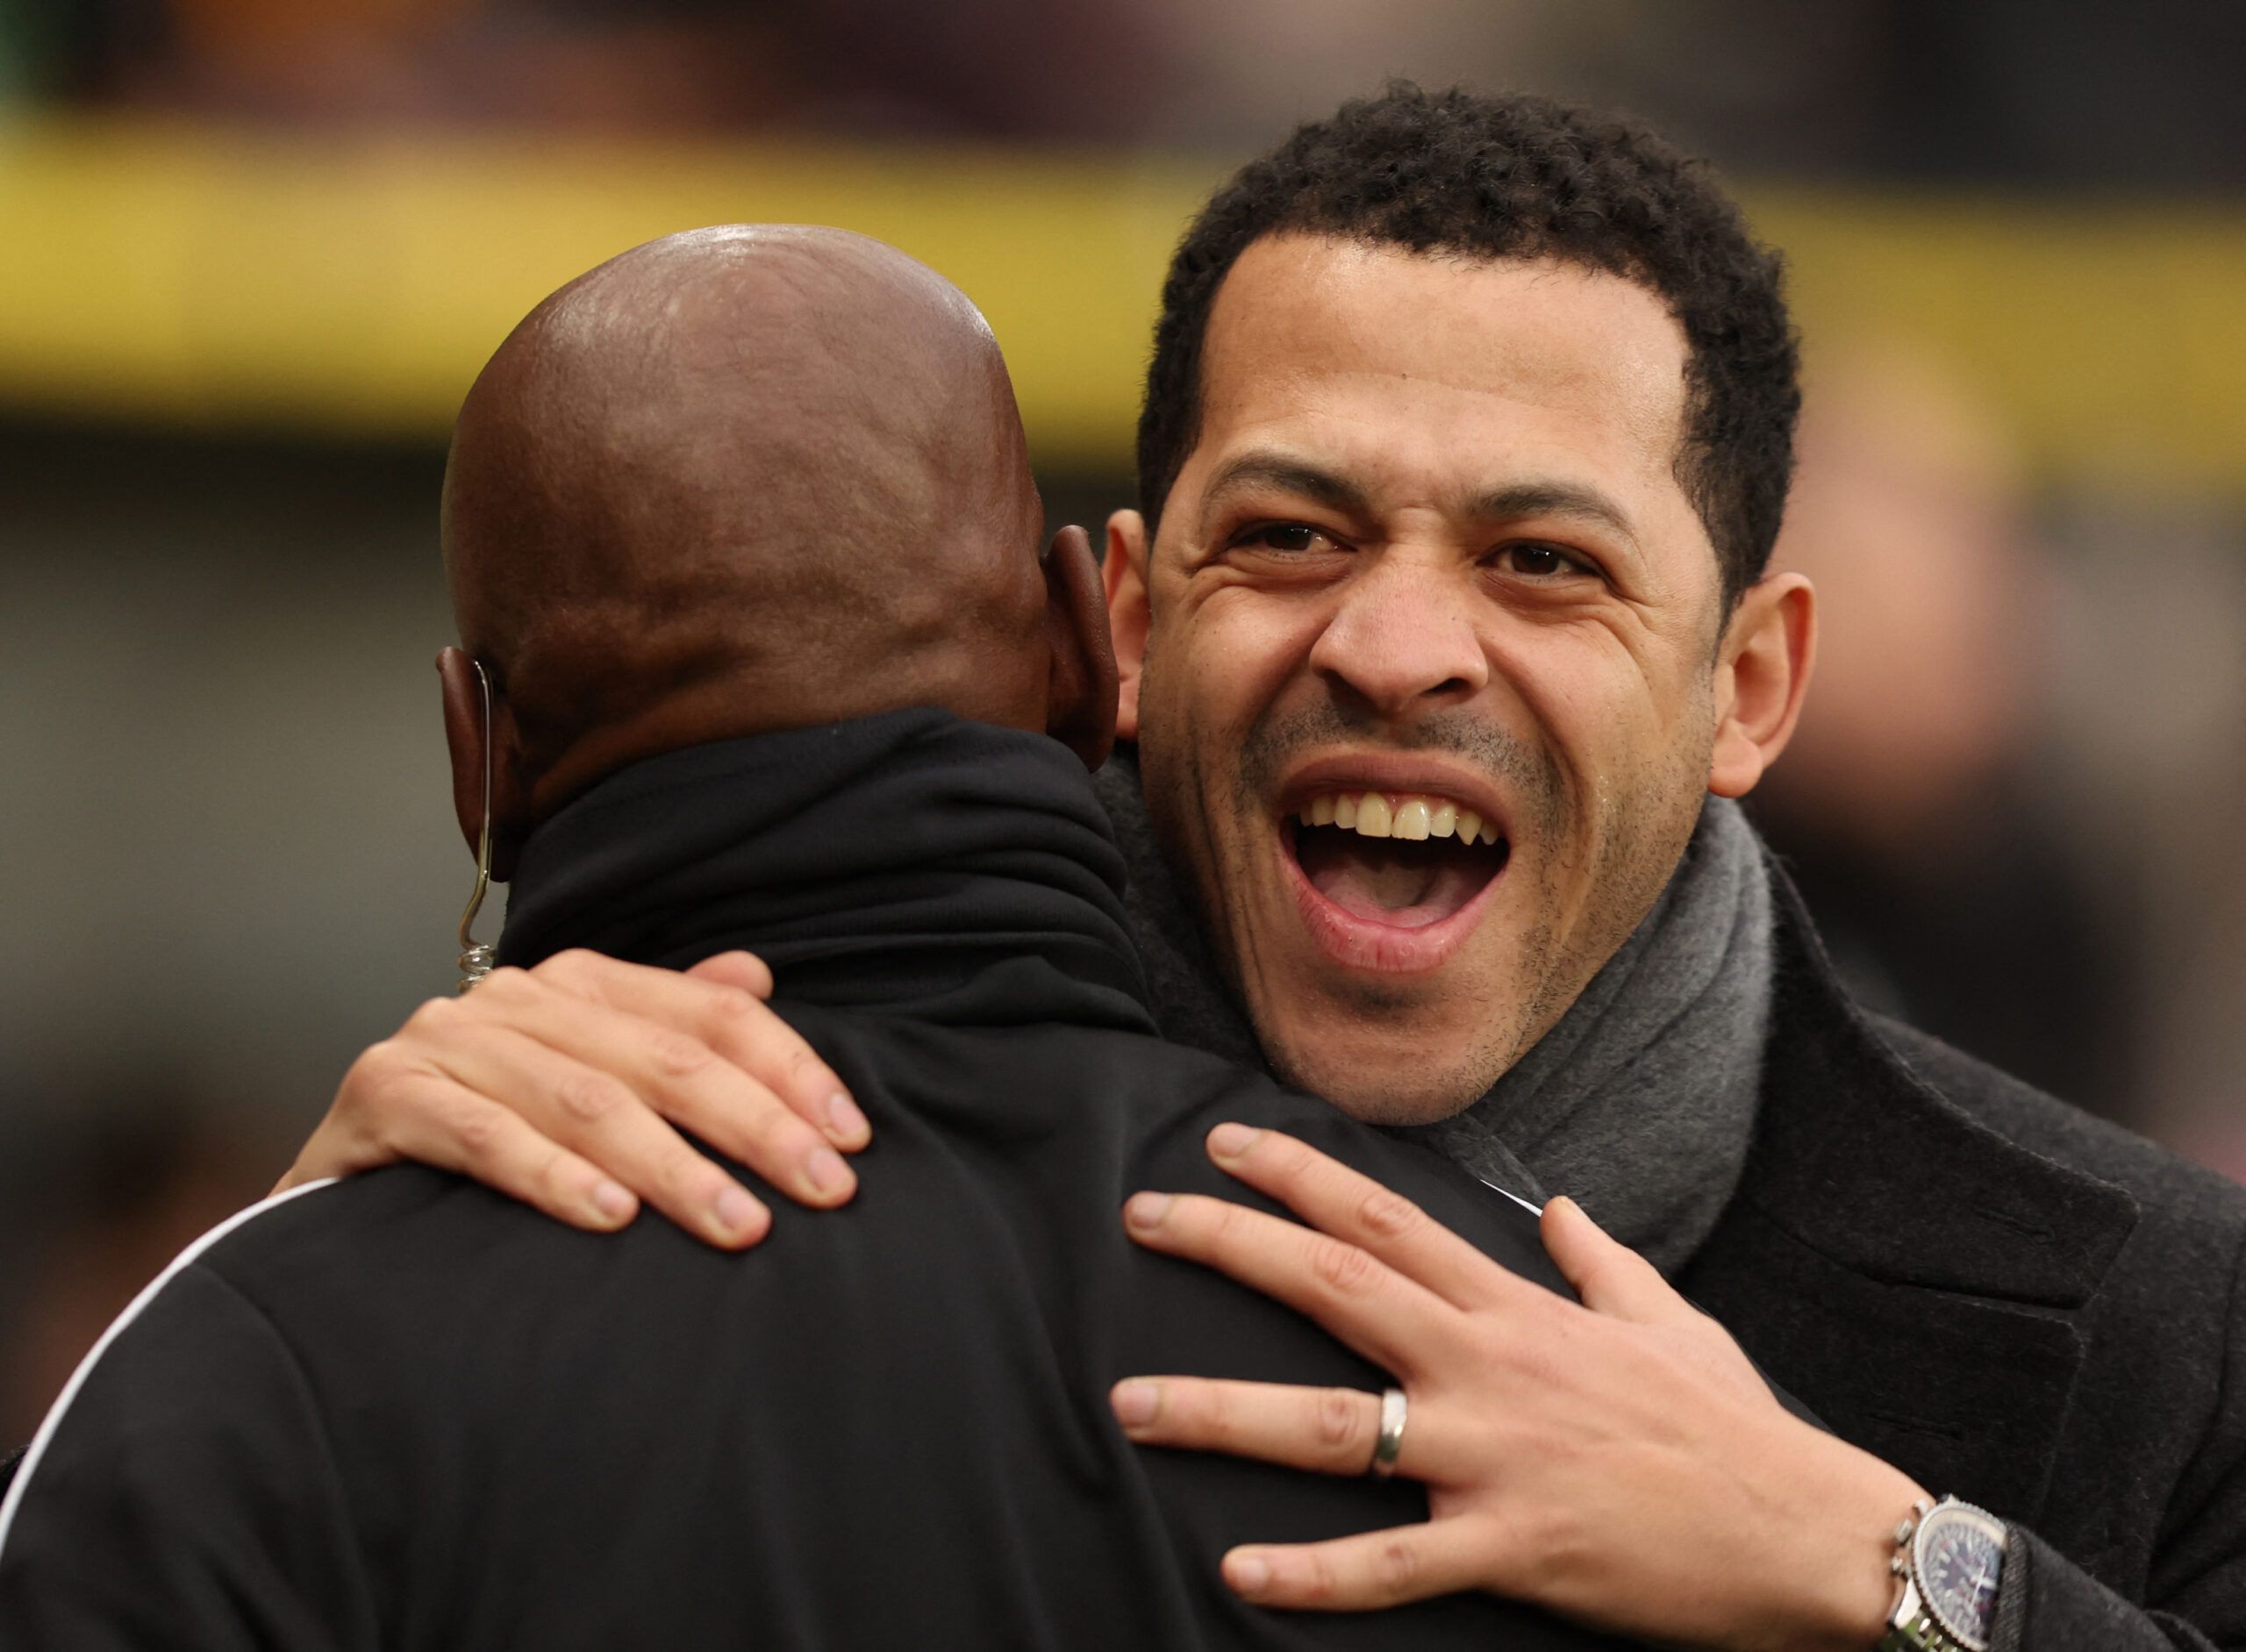 Soccer Football - FA Cup Third Round - Hull City v Fulham - MKM Stadium, Hull, Britain - January 7, 2023 Hull City manger Liam Rosenior with Fulham assistant coach Luis Boa Morte before the match Action Images via Reuters/John Clifton